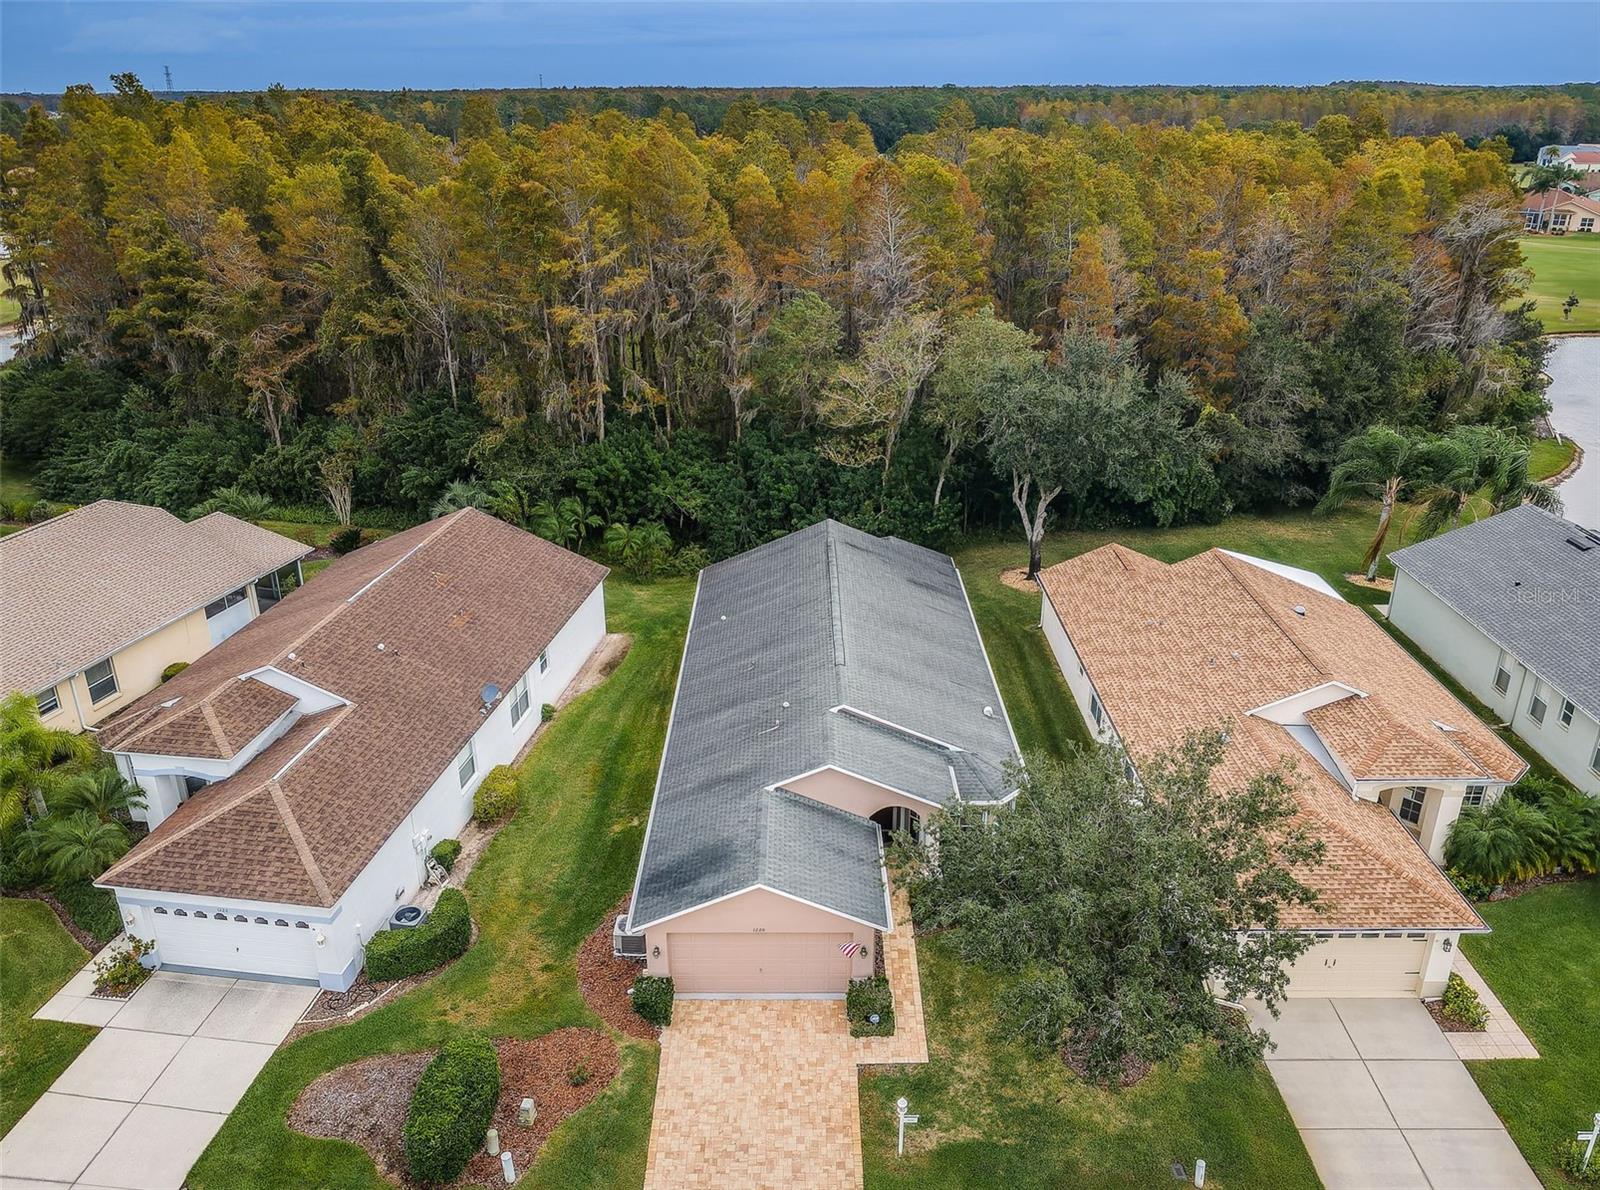 Aerial View of Home & Lot